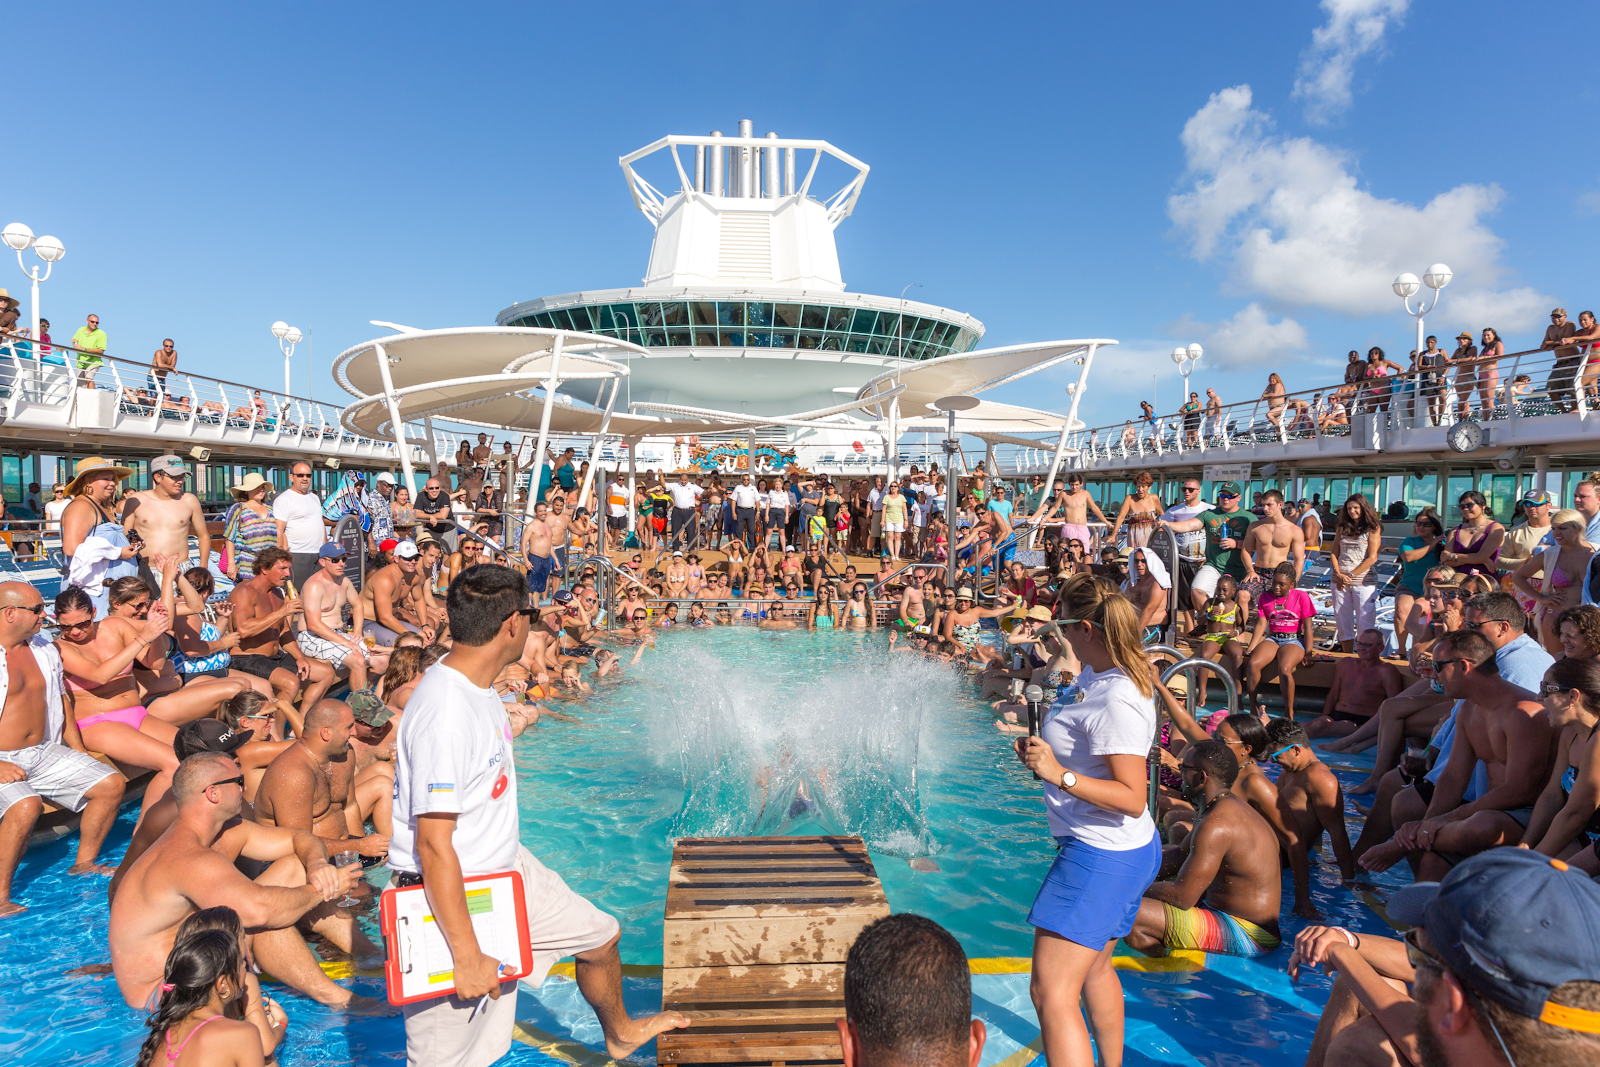 huge crowd of people around an onboard swimming pool of a cruise ship.